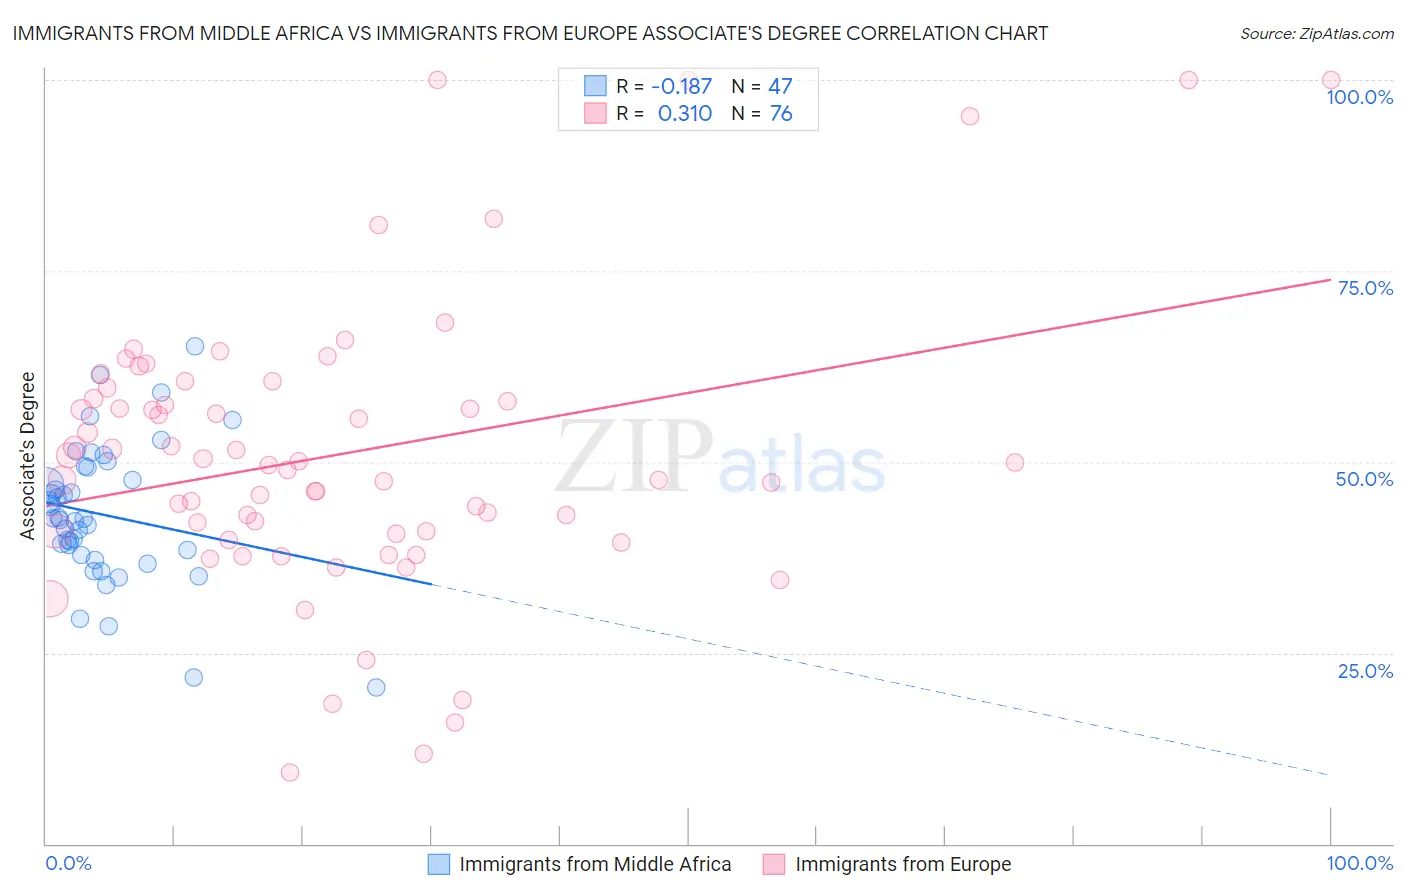 Immigrants from Middle Africa vs Immigrants from Europe Associate's Degree